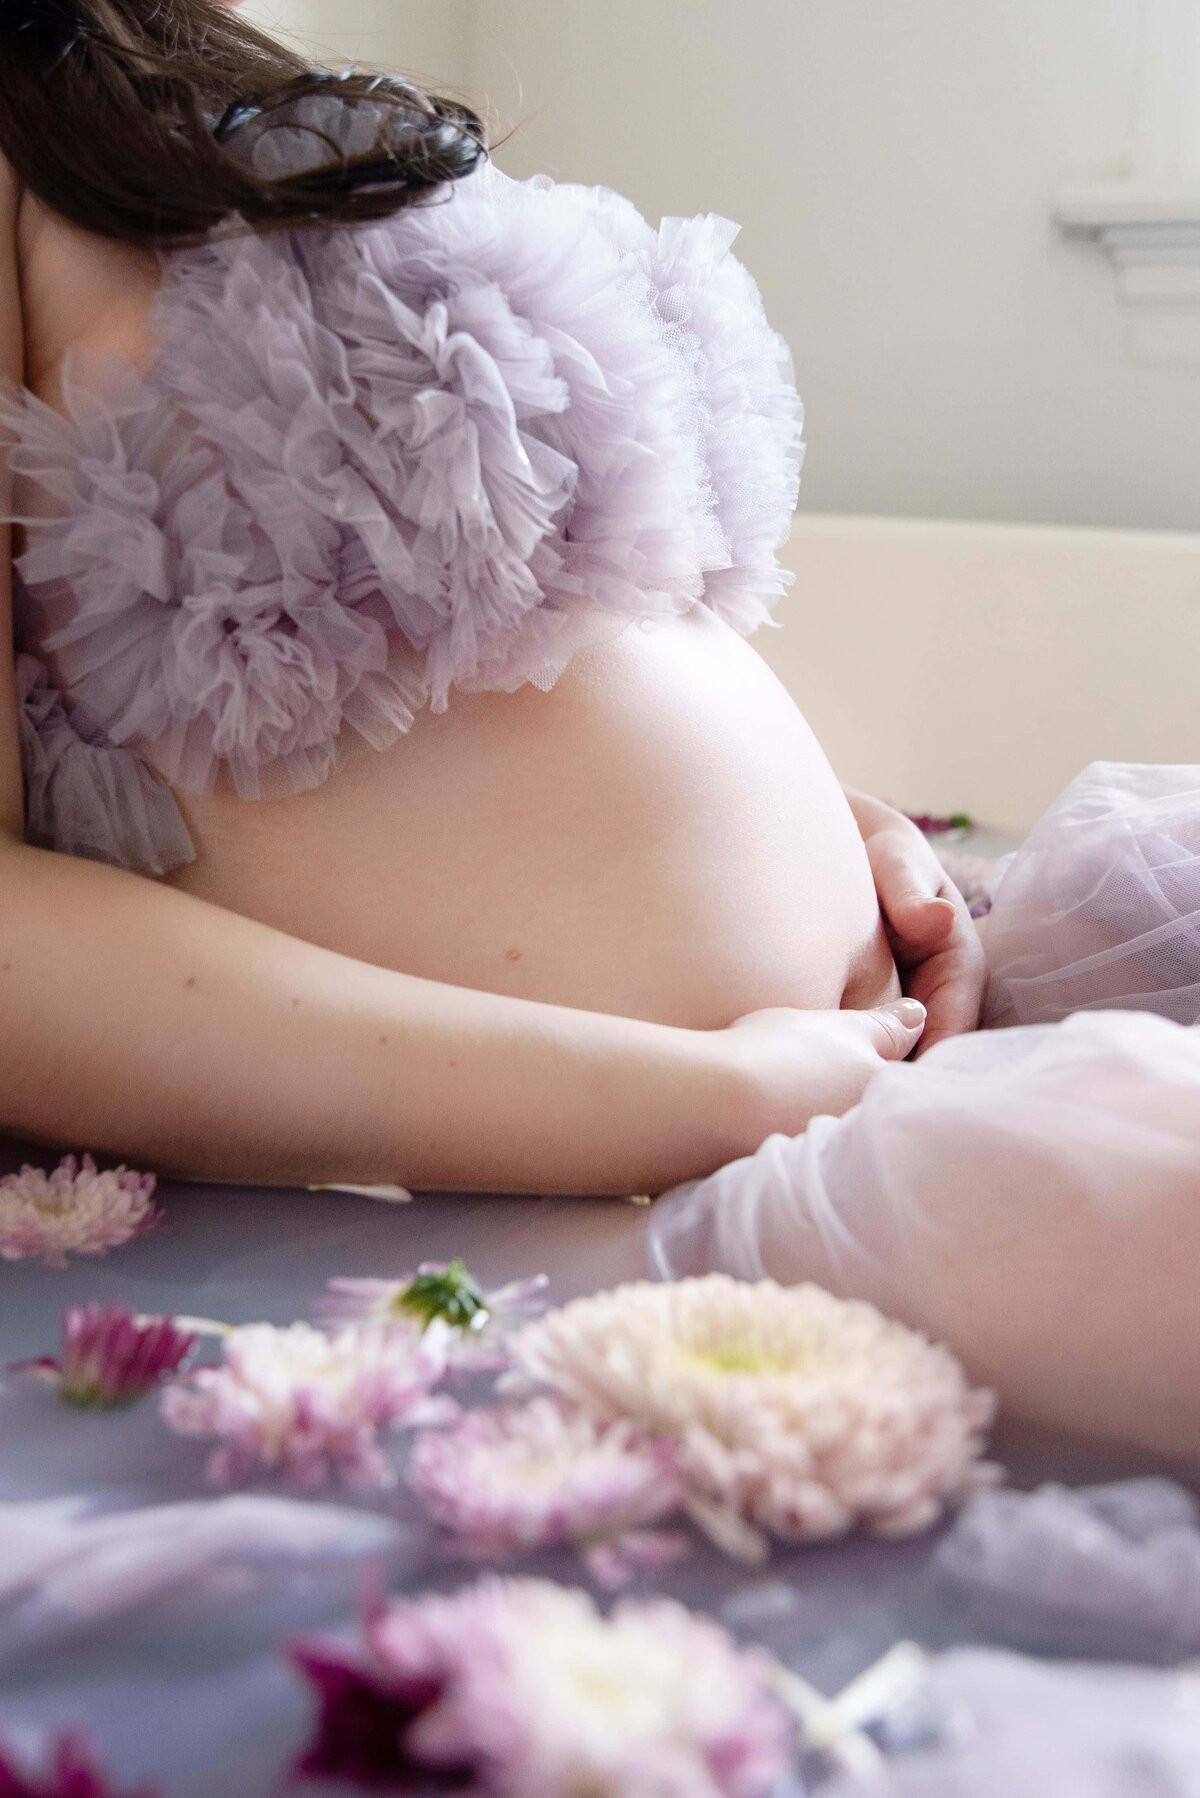 st-louis-maternity-photographer-close-up- of-pregnant-belly-in-milk-bath-with-purple-flowers